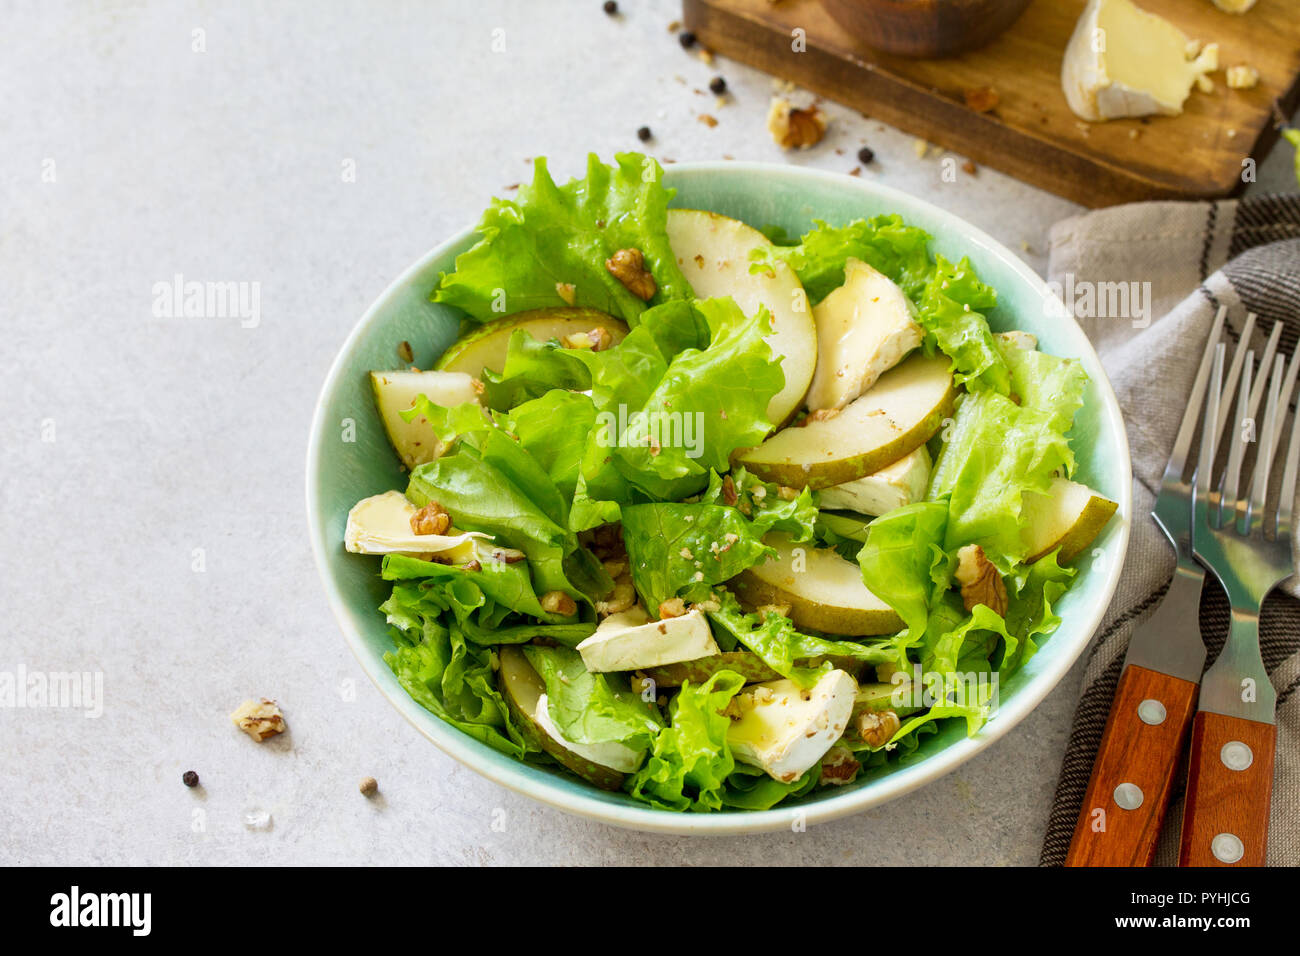 Pear Salad, Walnut, Camembert Cheese and Vinaigrette Dressing on stone table. Traditional french cuisine. Copy space. Stock Photo